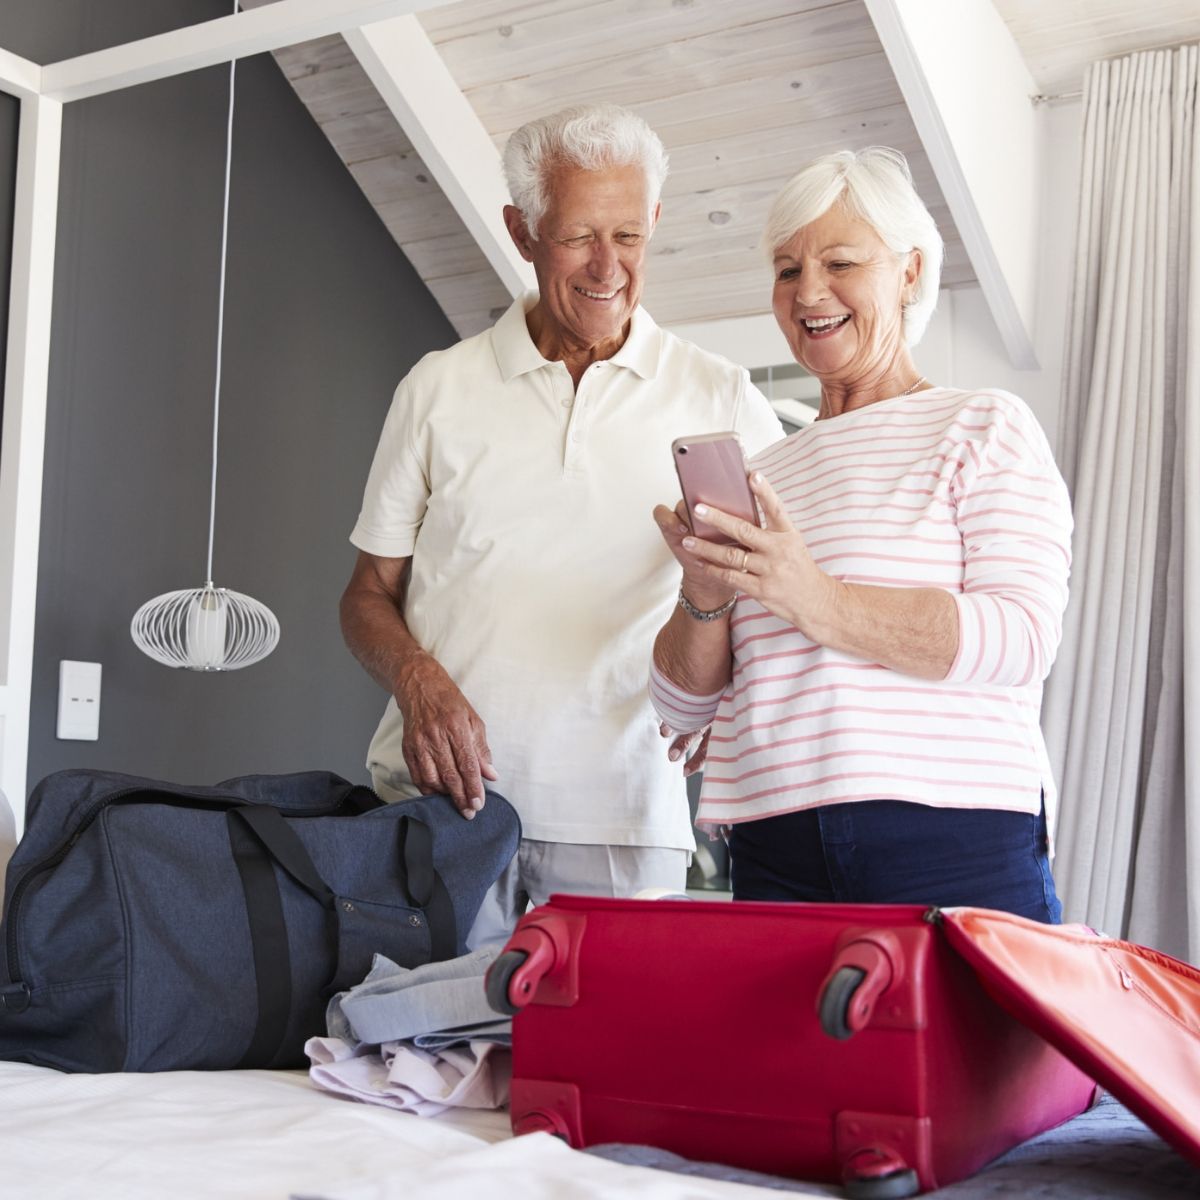 do seniors travel free on weekends